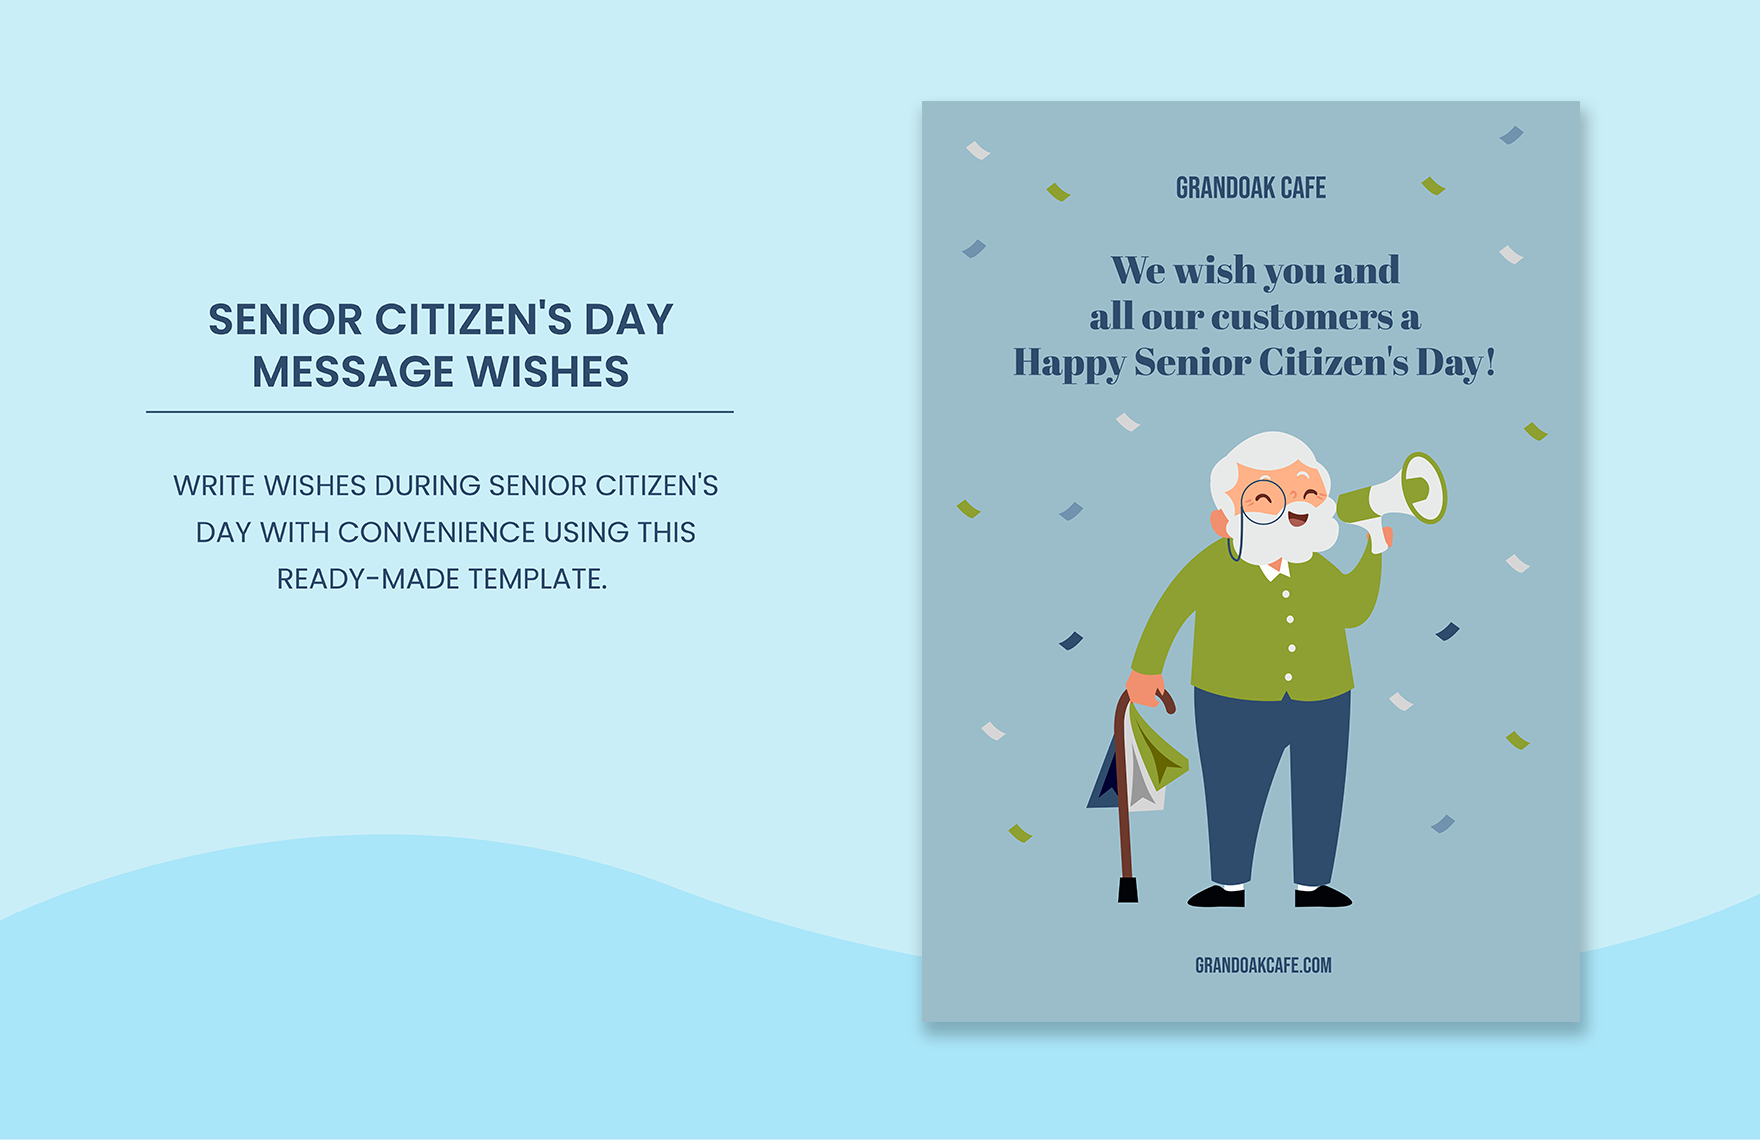 Free Senior Citizen's Day Message Wishes Template in PDF, Illustrator, SVG, PNG